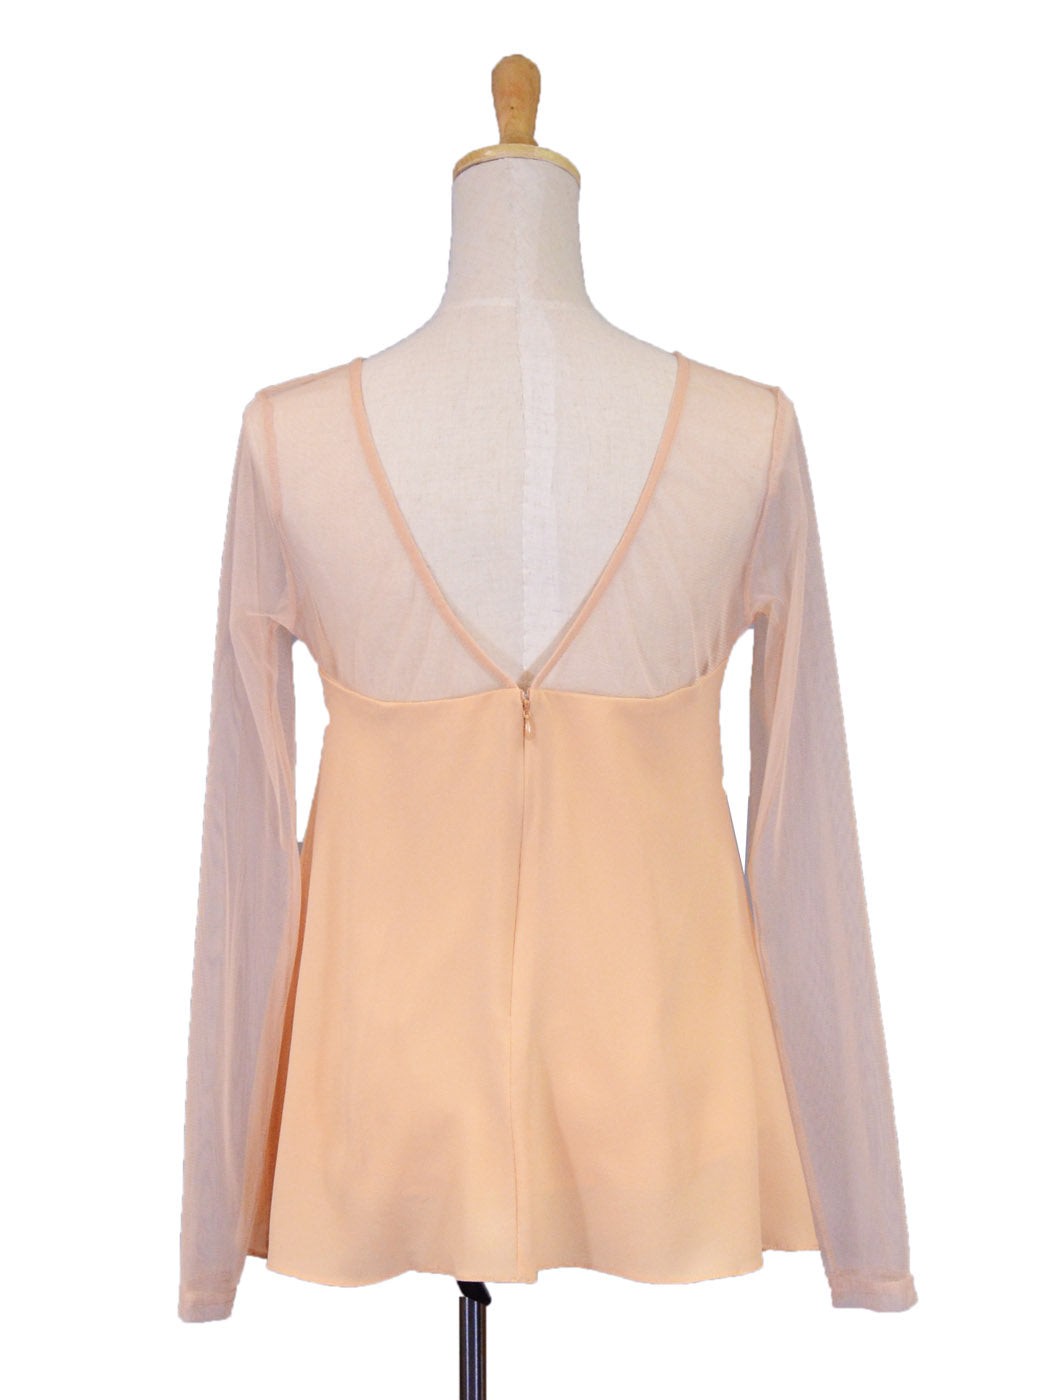 Ligali Peach Girly Long Sleeved Flowy Blouse With Beaded Design Mesh Neckline - ALILANG.COM